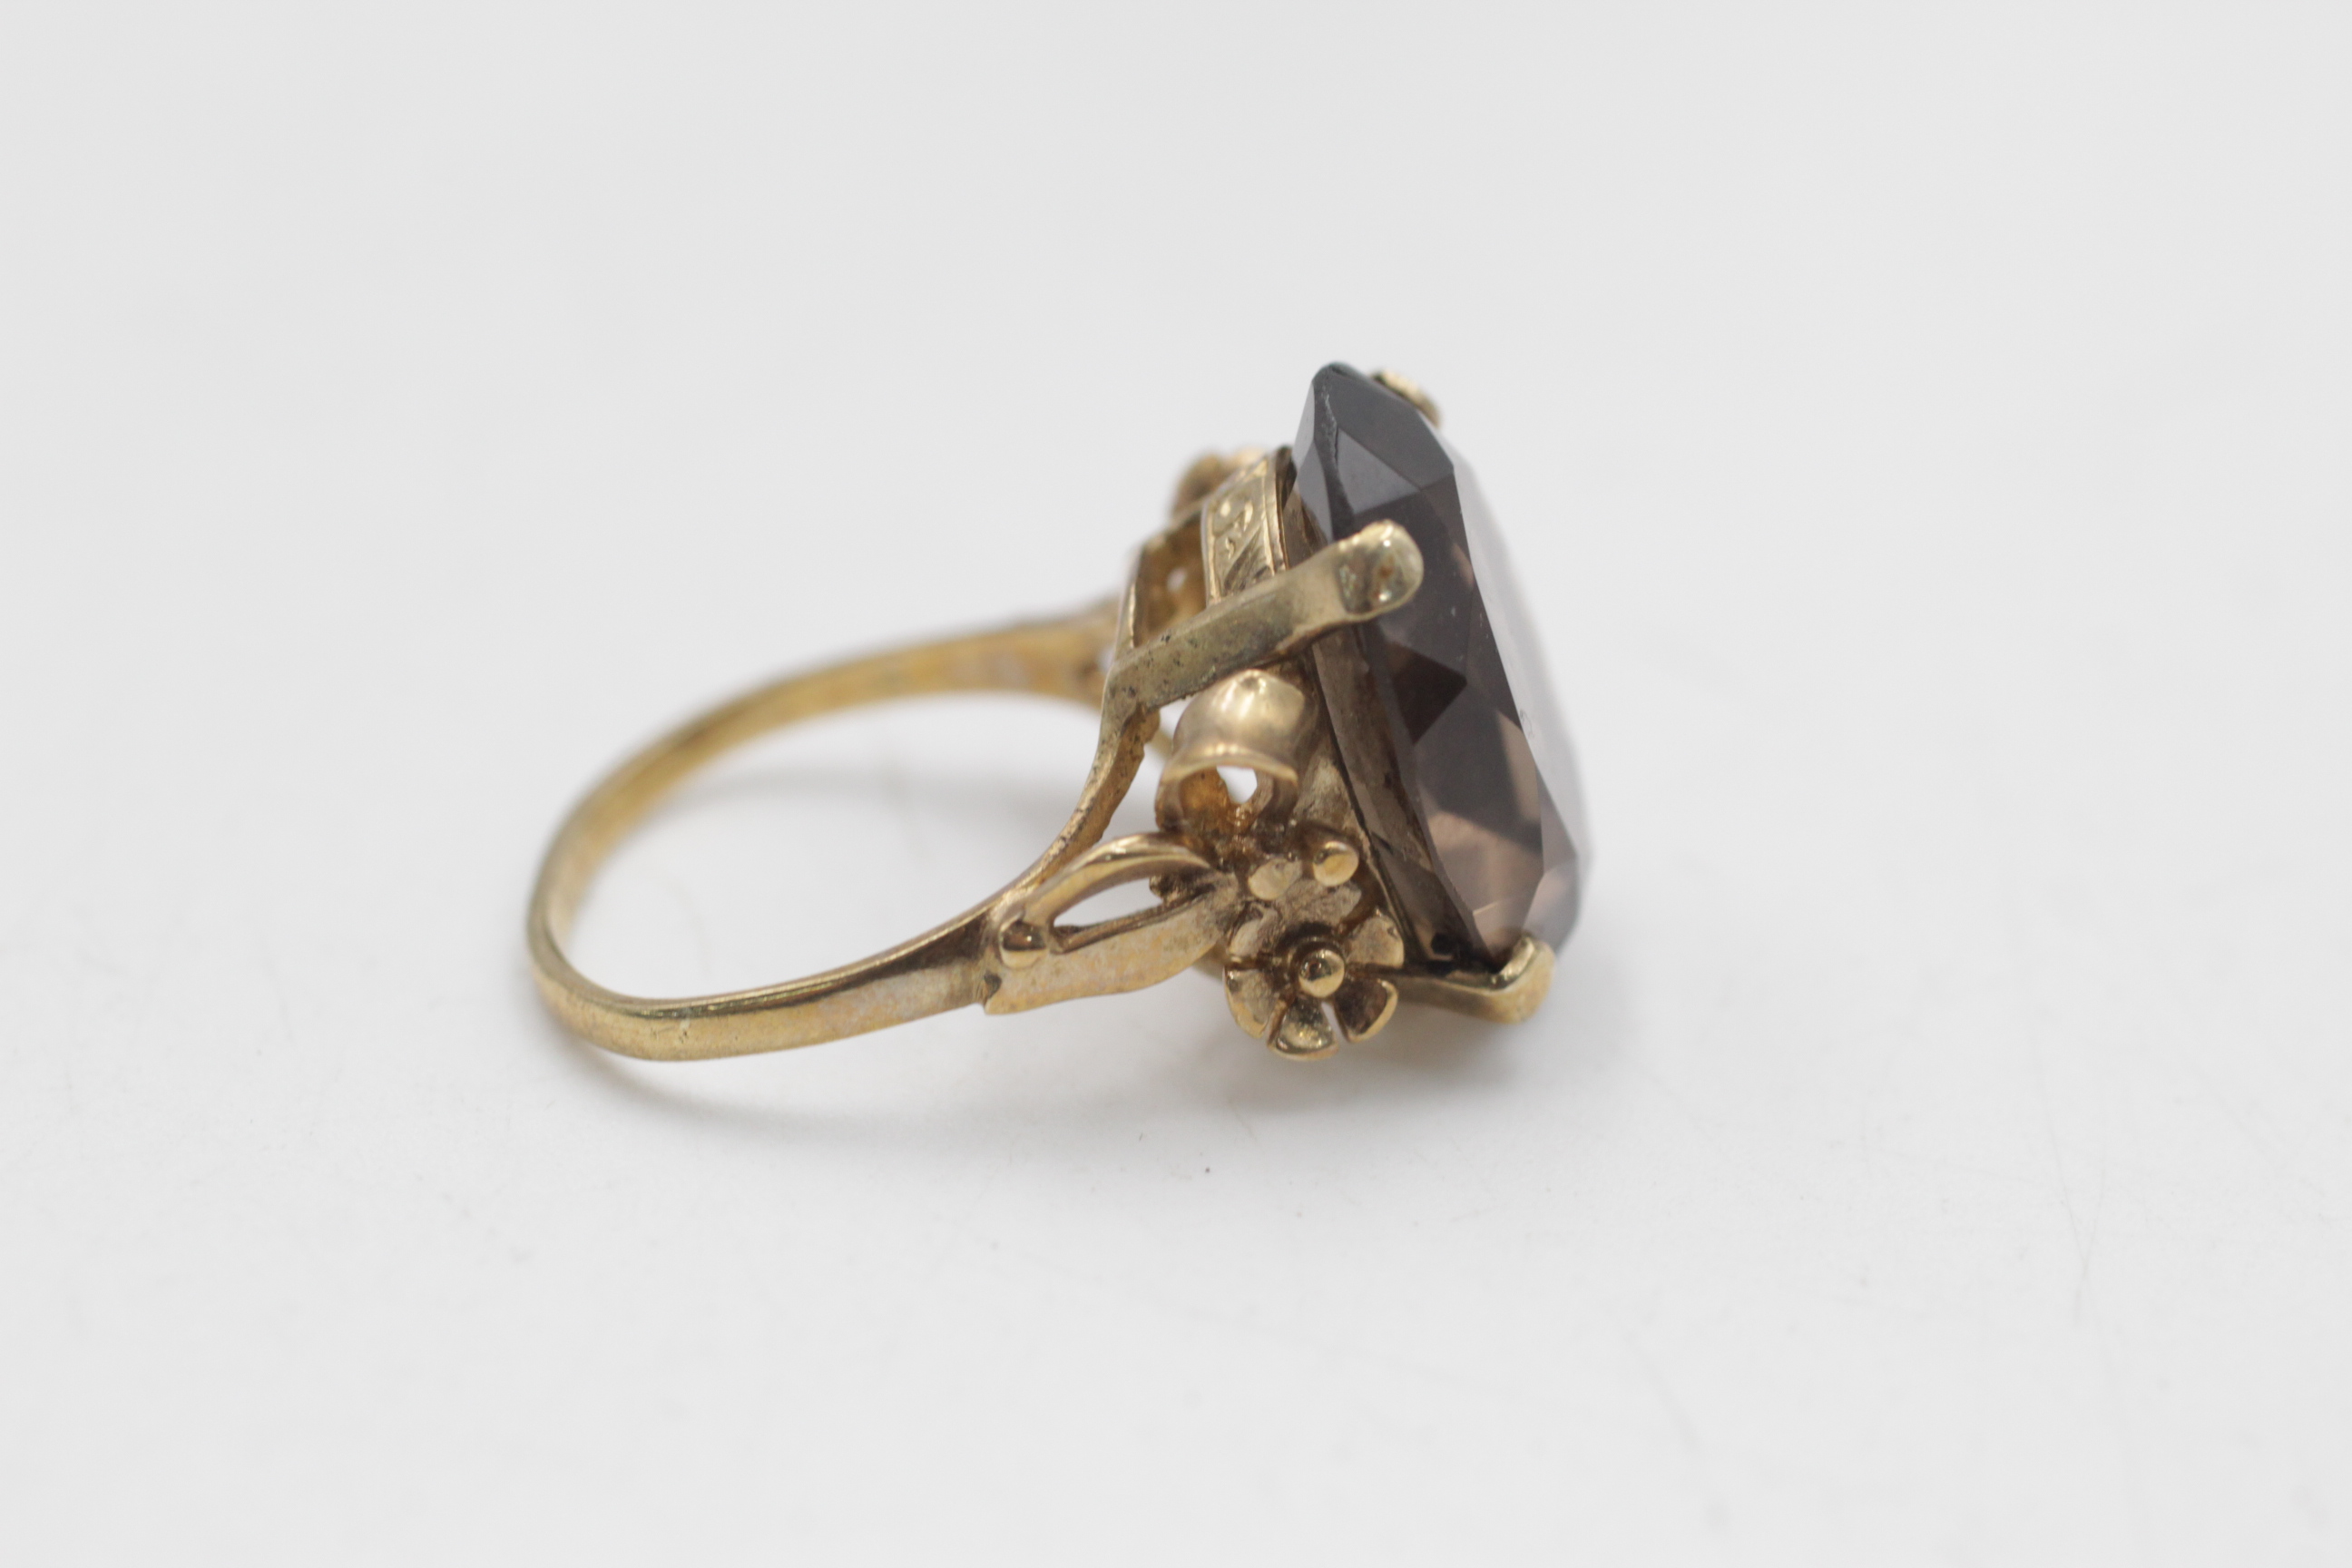 9ct gold vintage smoky quartz solitaire ornate floral setting cocktail ring (5.5g) - Image 4 of 5